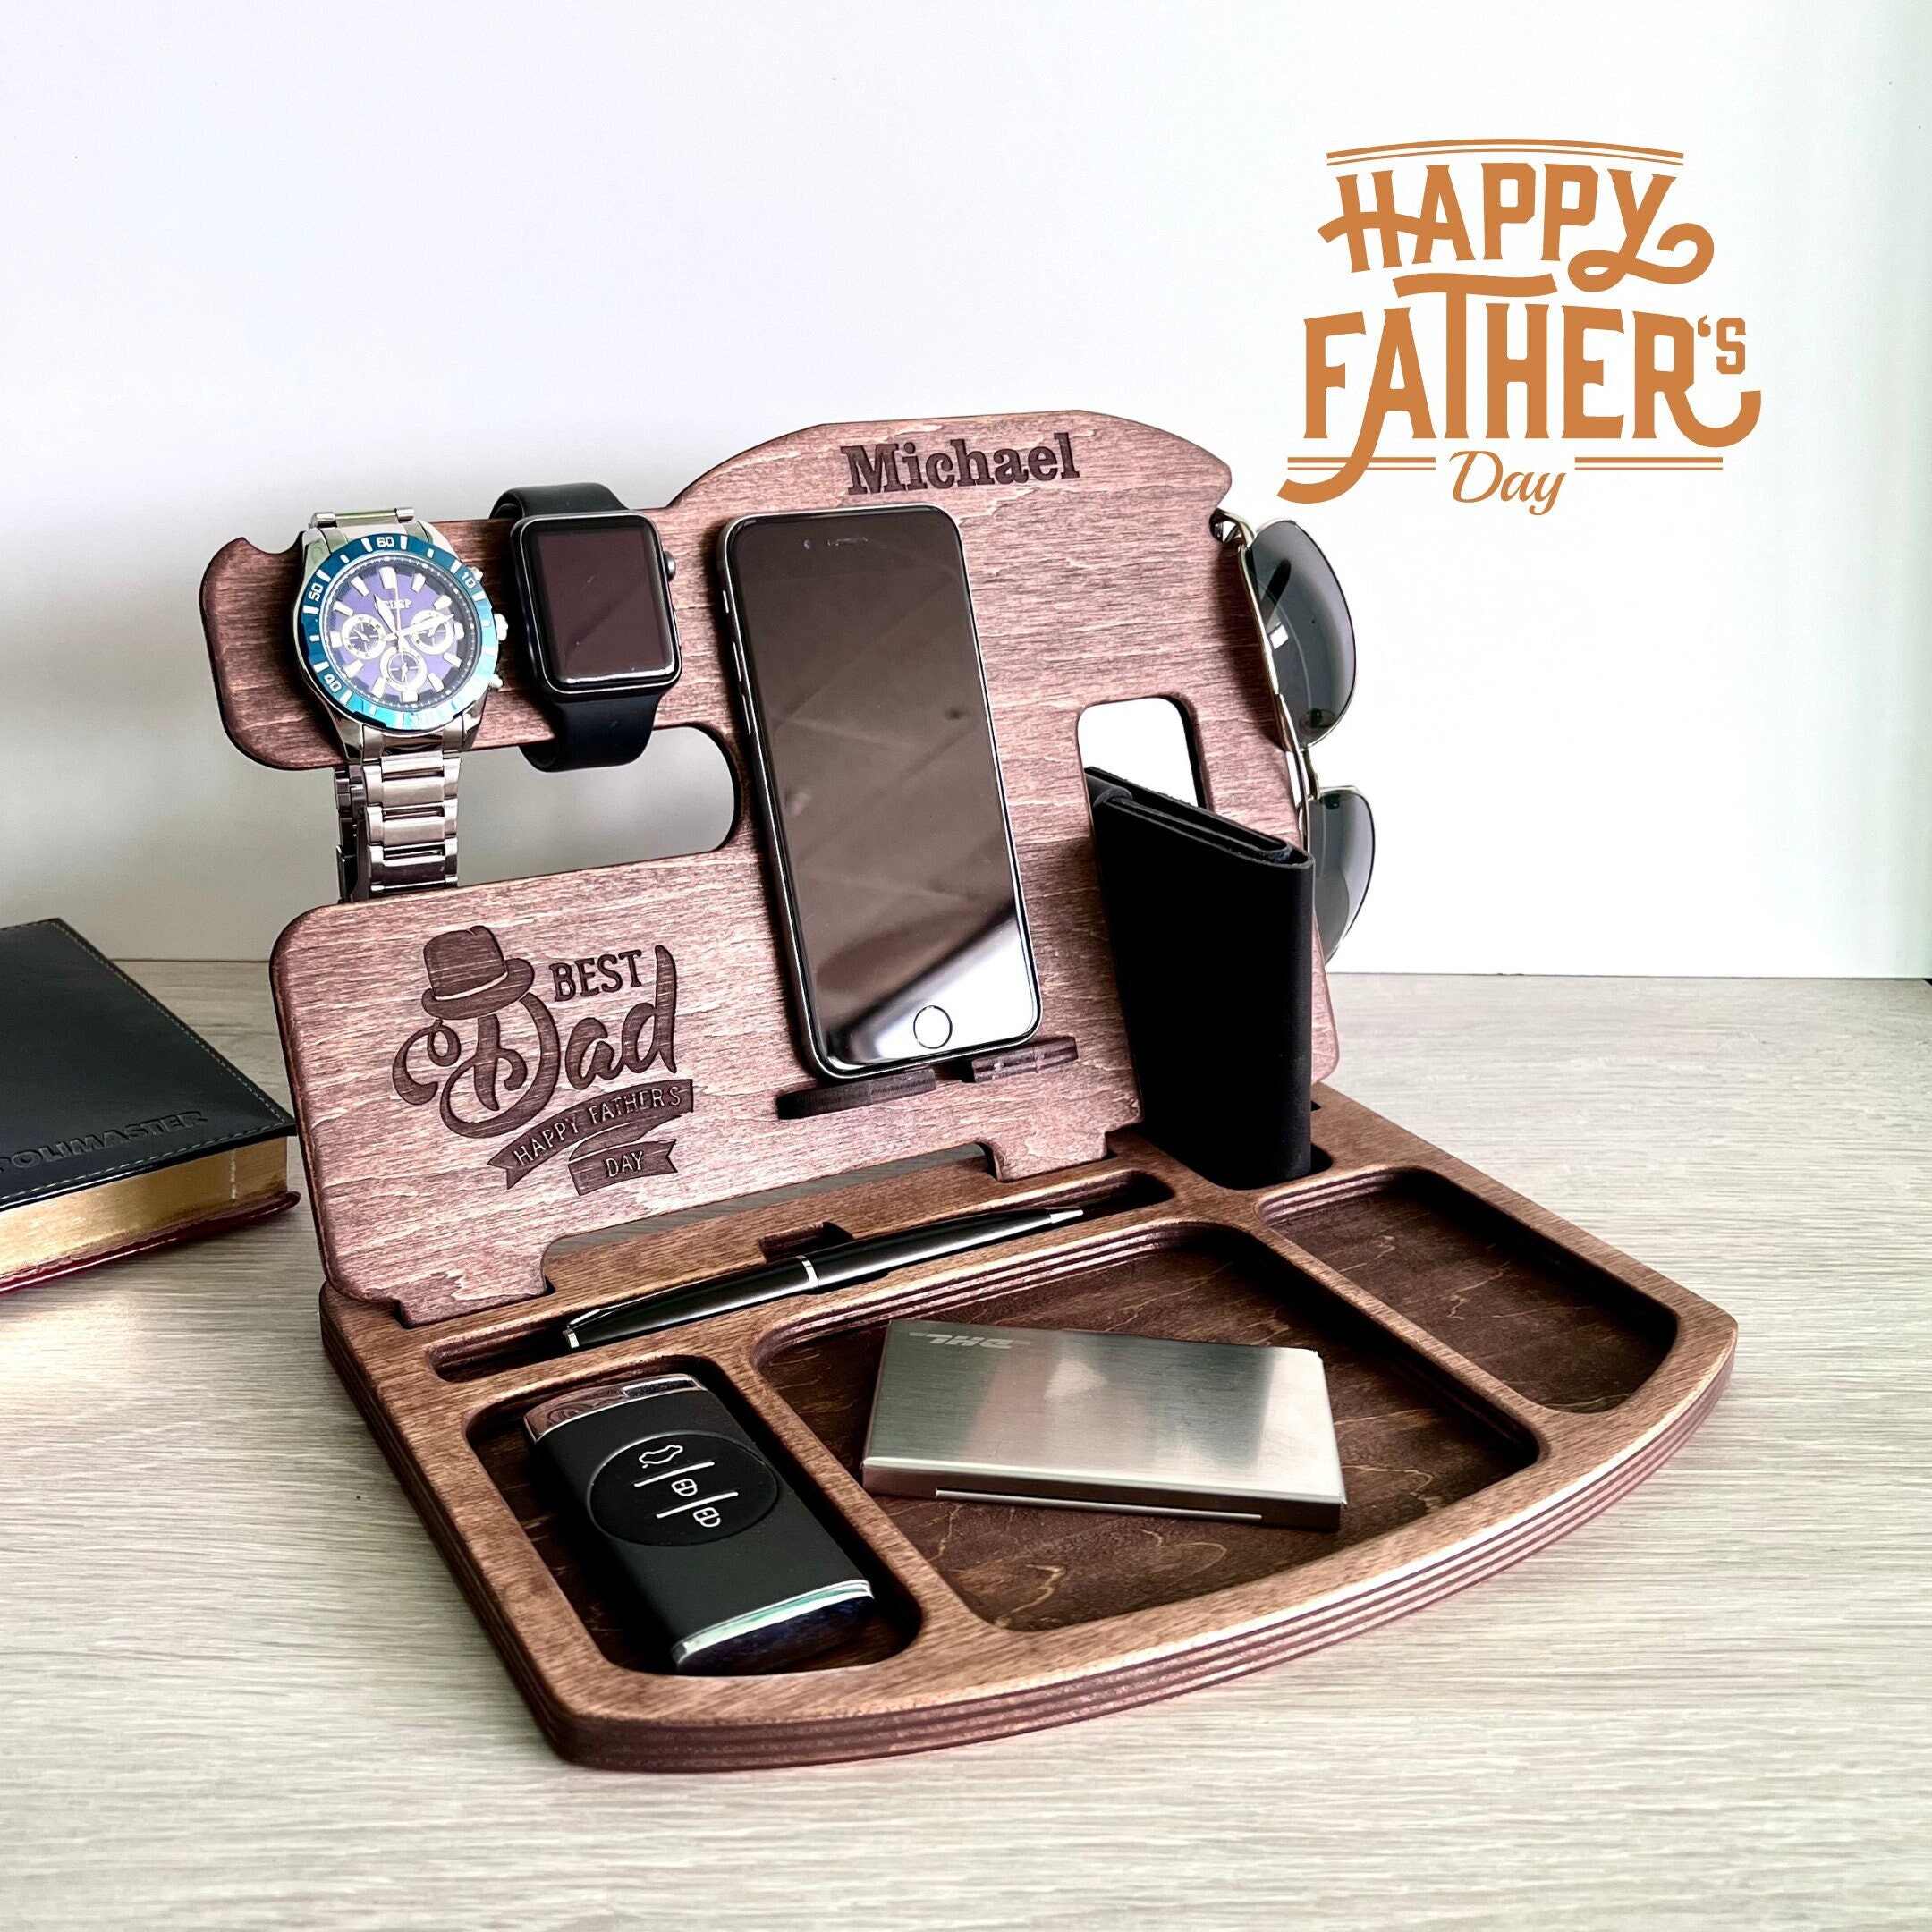 Dad Birthday Gift Dads Gift Gifts For Dad Birthday For Dad - Etsy